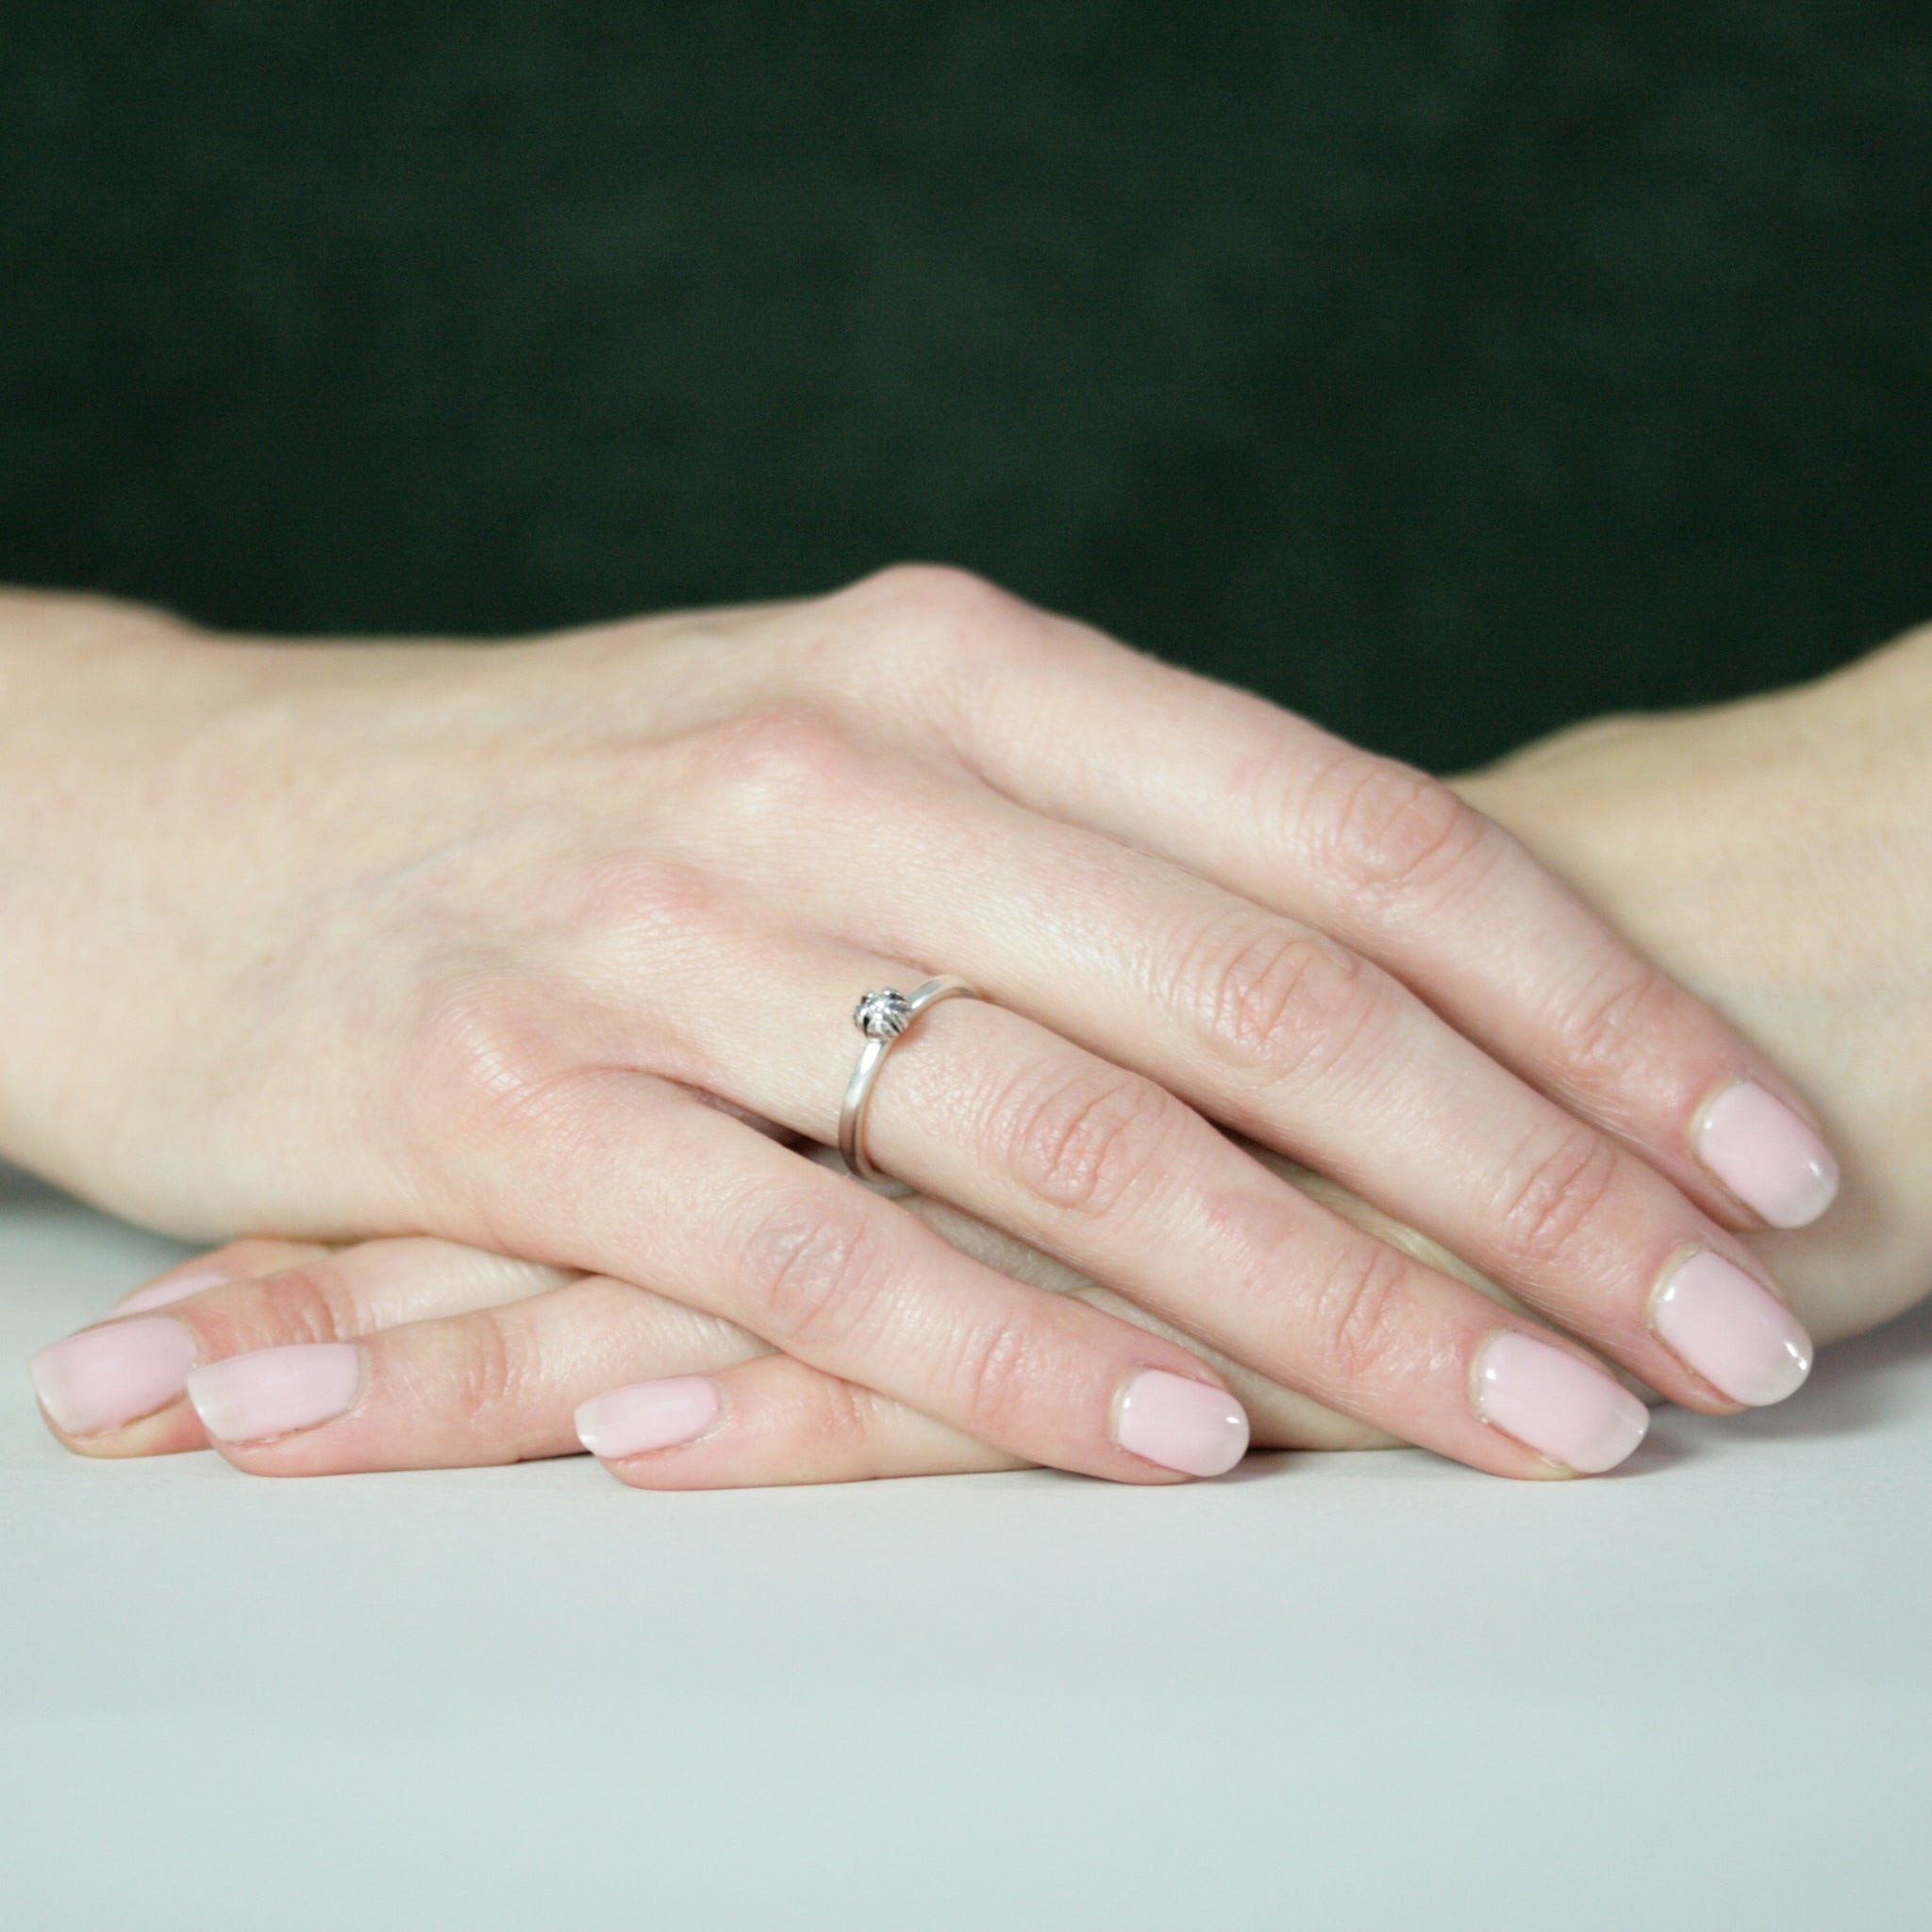 hands resting with silver bud diamond ring on finger